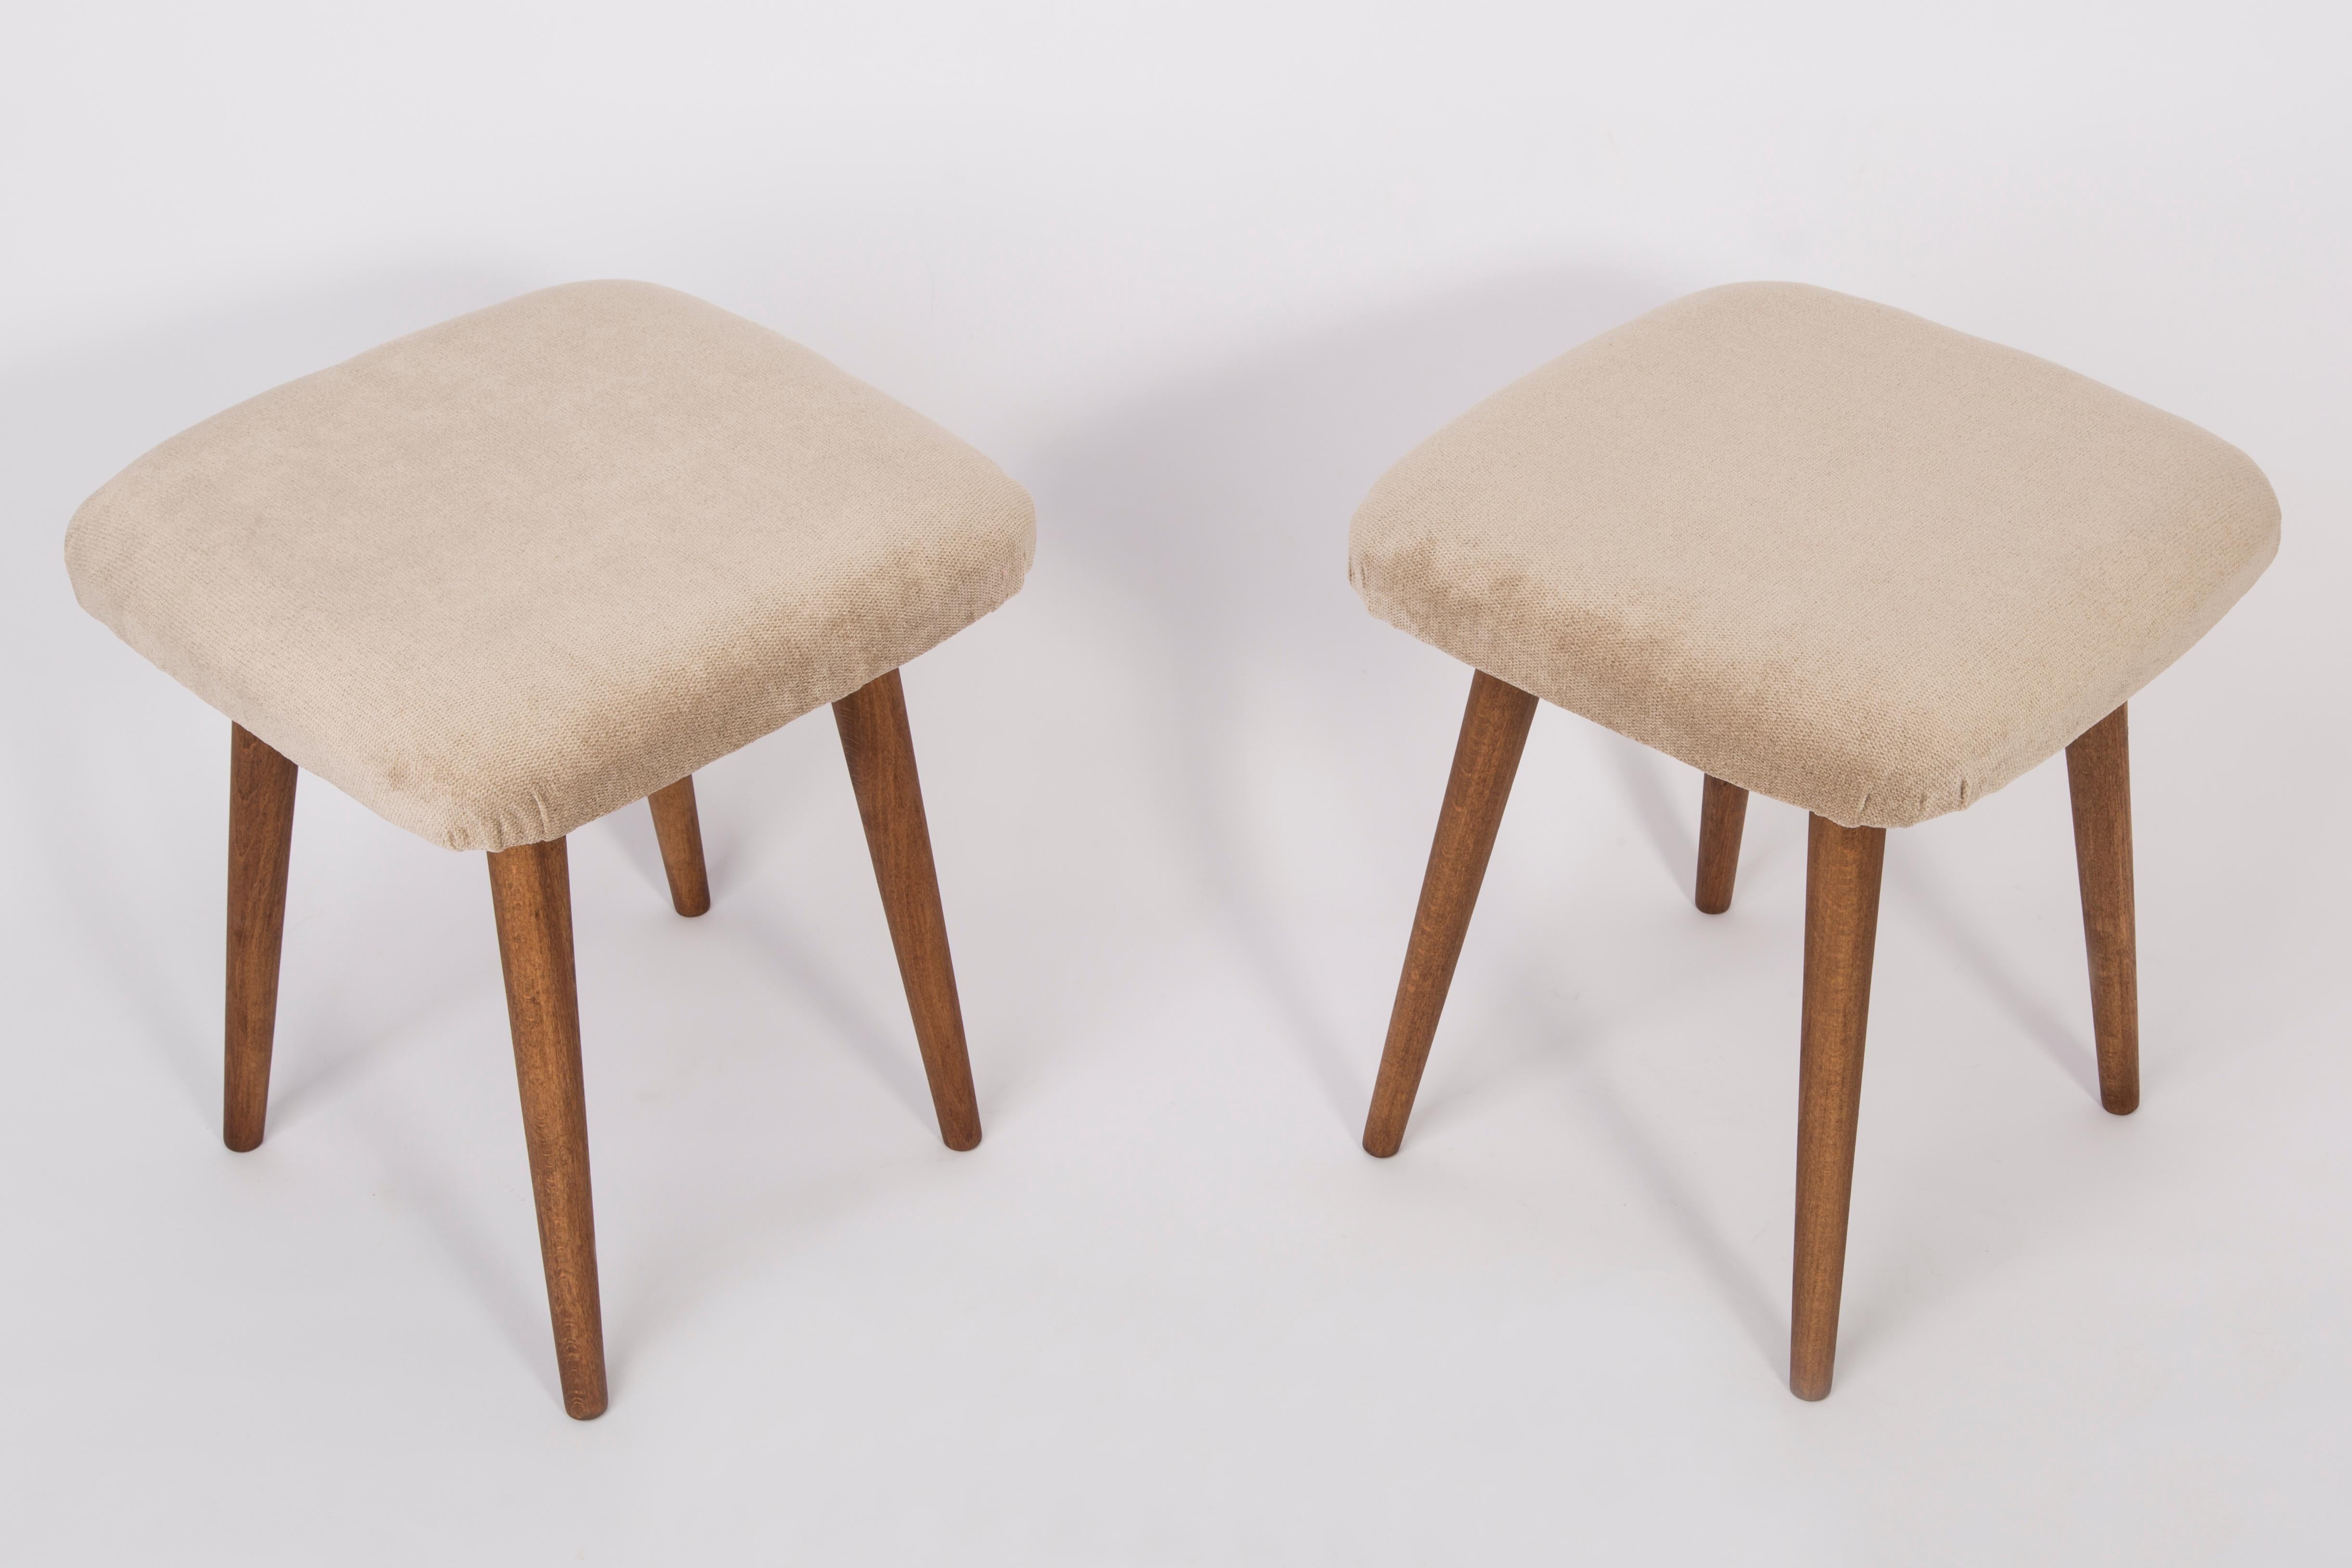 Stool from the turn of the 1960s and 1970s. Beautiful, well crafted beige upholstery. The stool consists of an upholstered part, a seat and wooden legs narrowing downwards, characteristic of the 1960s style. We can prepare this pair also in another